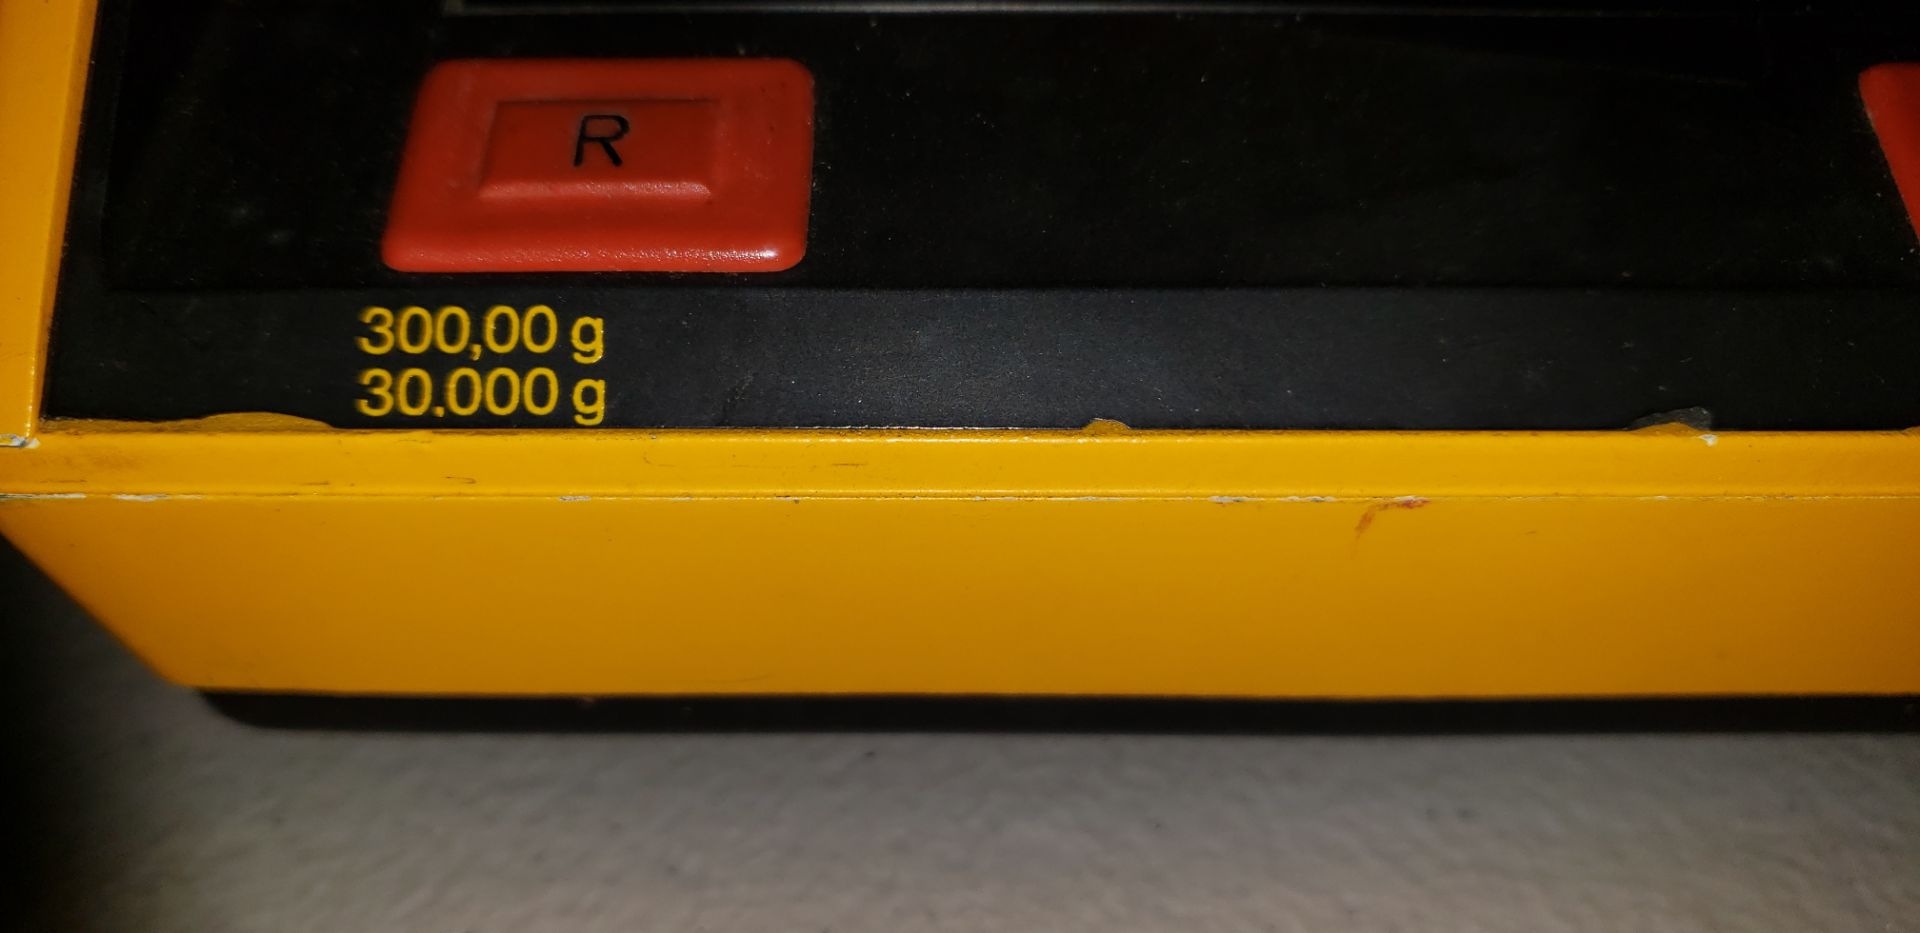 Sartorious Scale, Yellow - Image 3 of 7